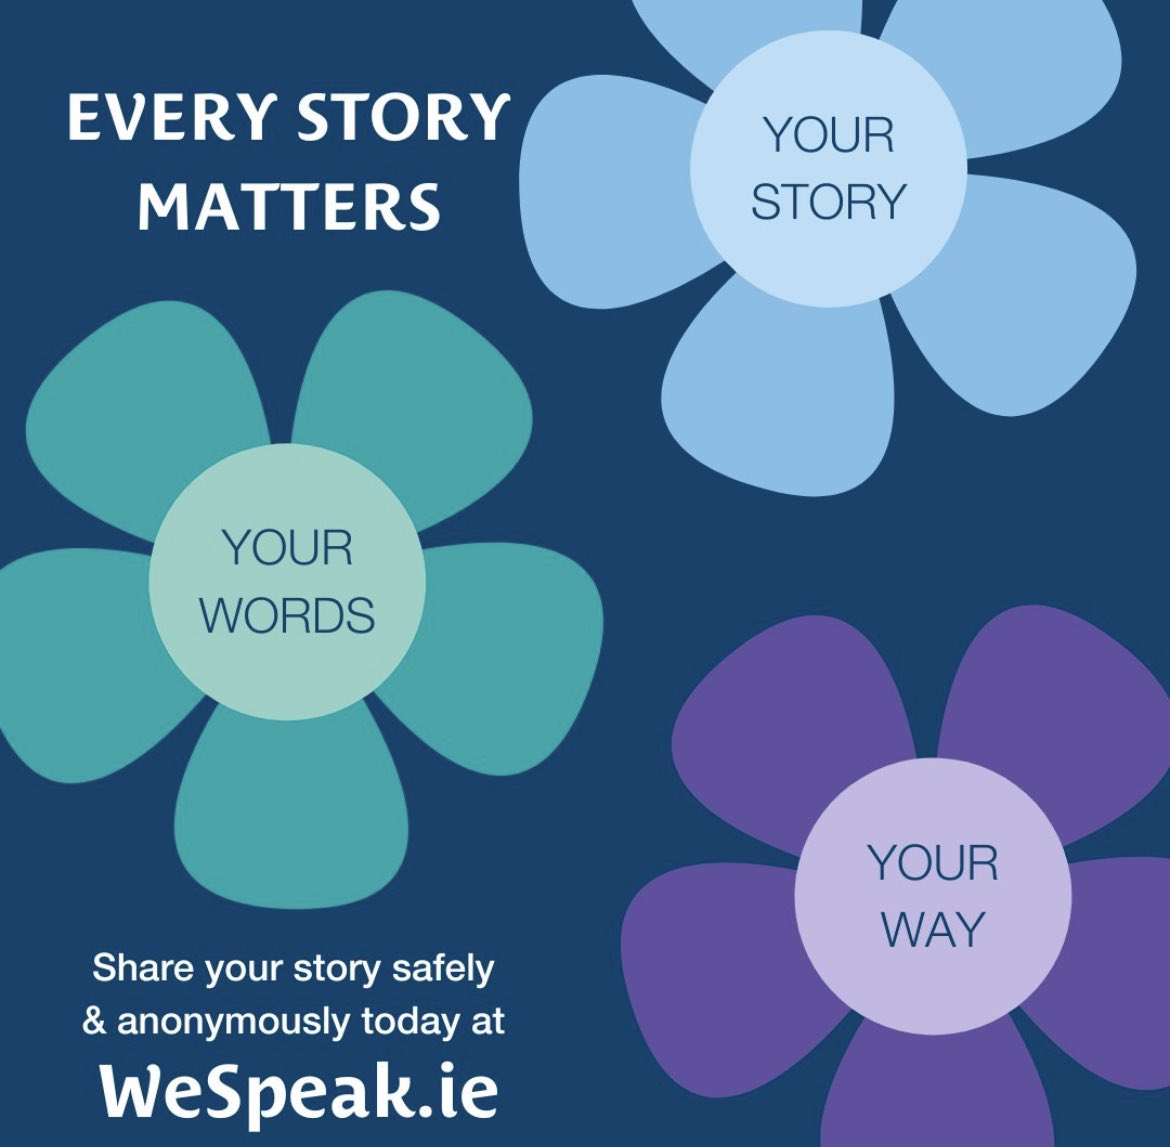 Everyone deserves to tell their story, share your story, in your words, your way 💬🤍 Visit WeSpeak.ie today where you can share your story safely & anonymously, or to read other people's stories 🤍